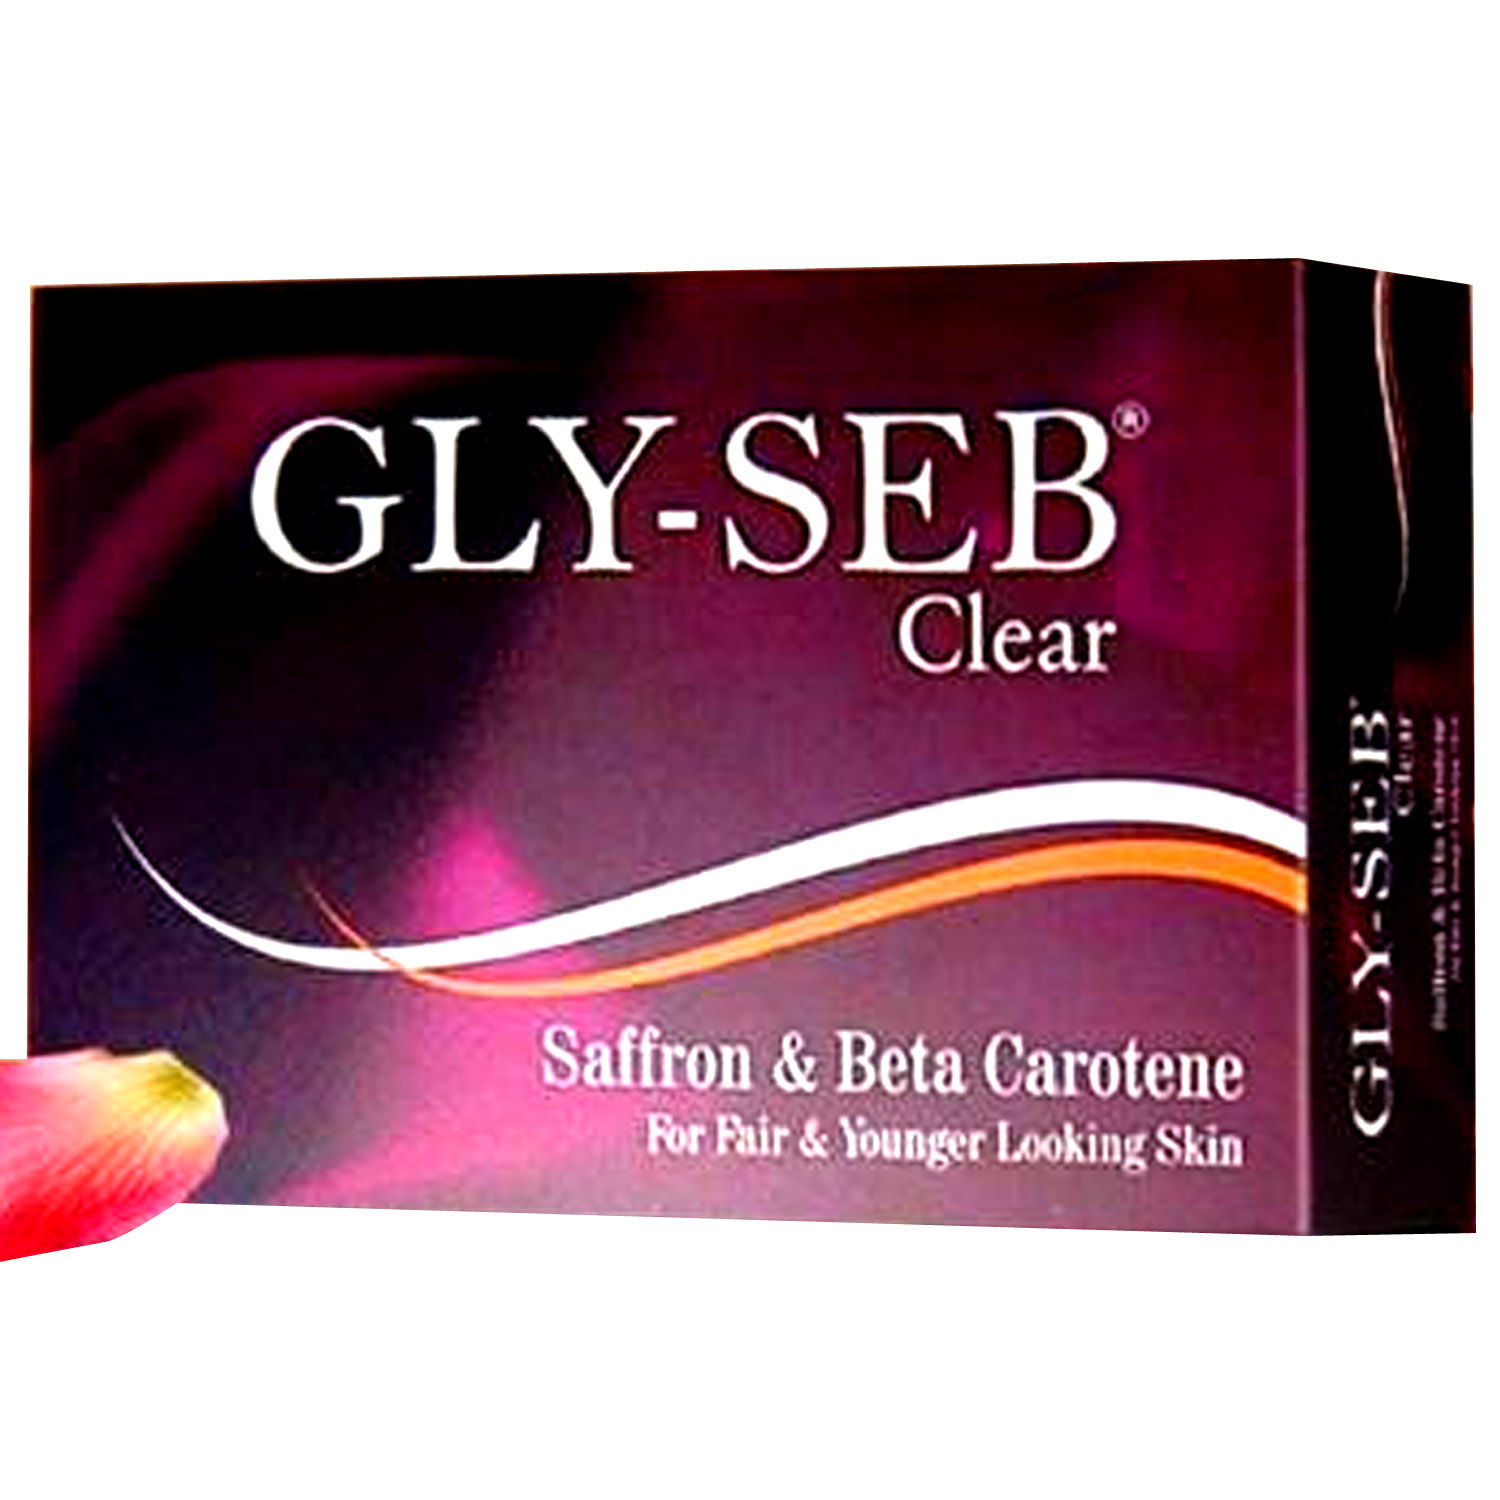 Glyseb Clear Soap 75g, Pack of 1 